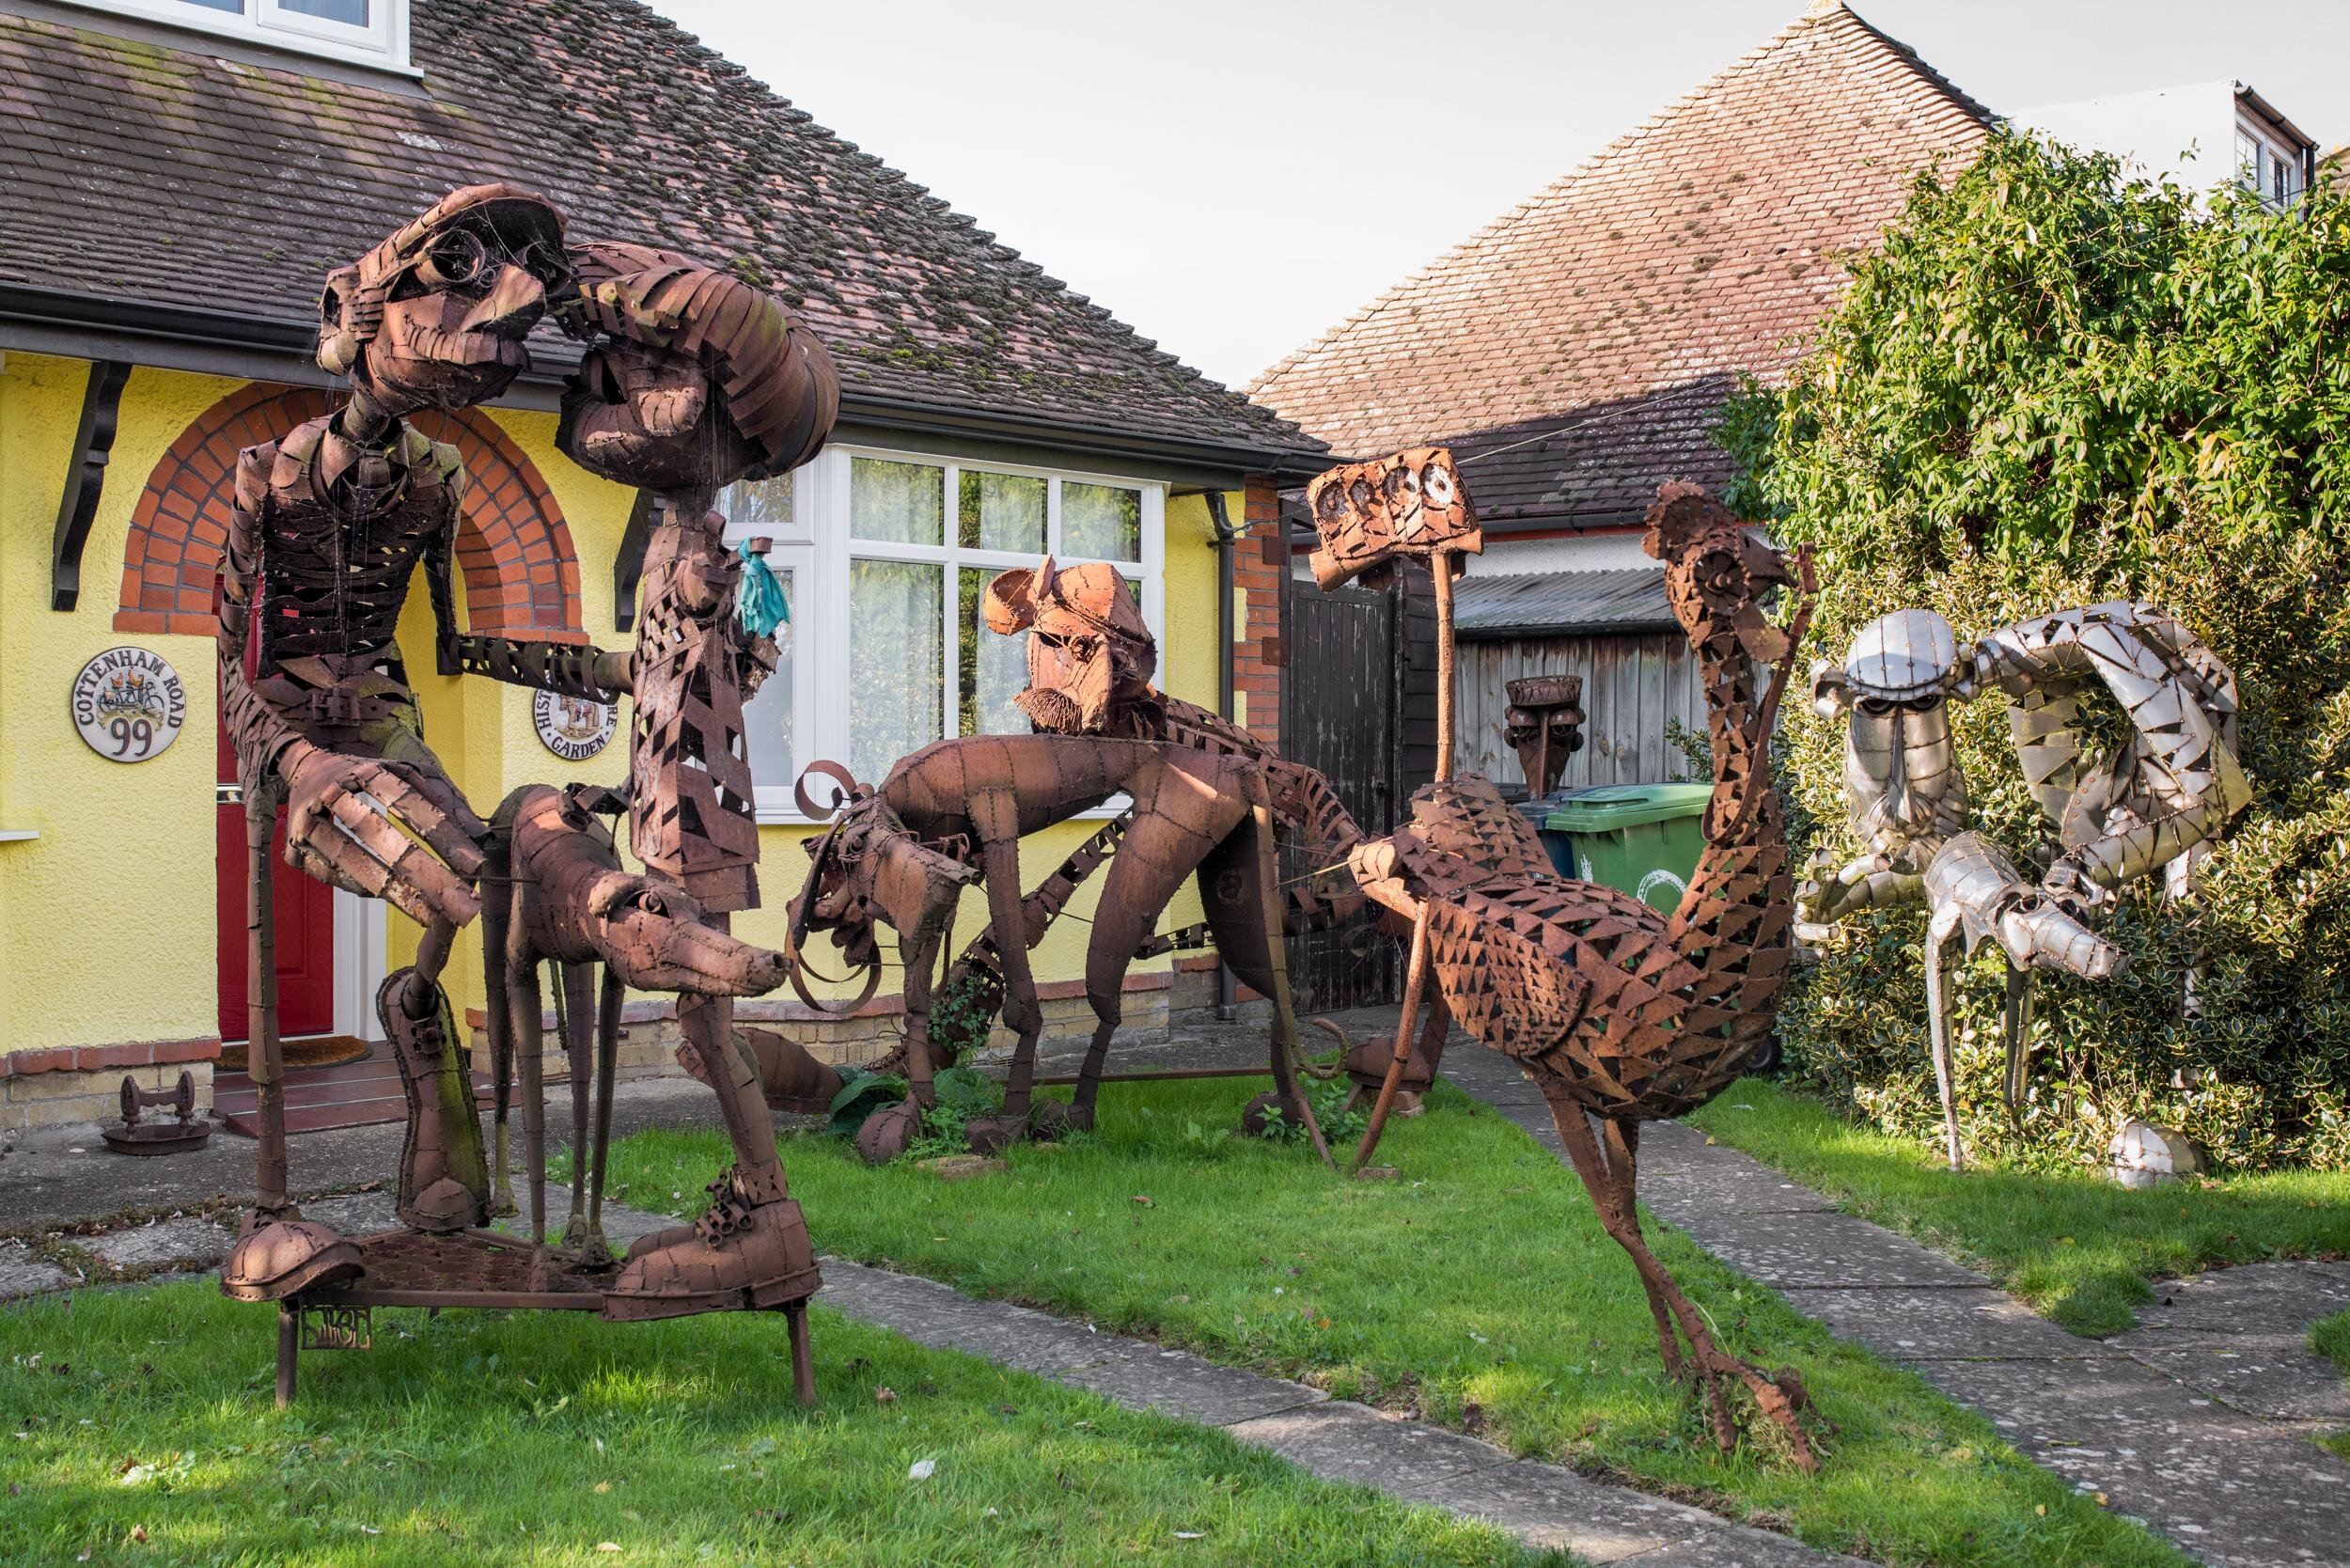 2 Sculpture Garden - Histon - Cambridgeshire - Tony Hillier - The Keepers Project - David Clegg -Thierry Bal.jpg